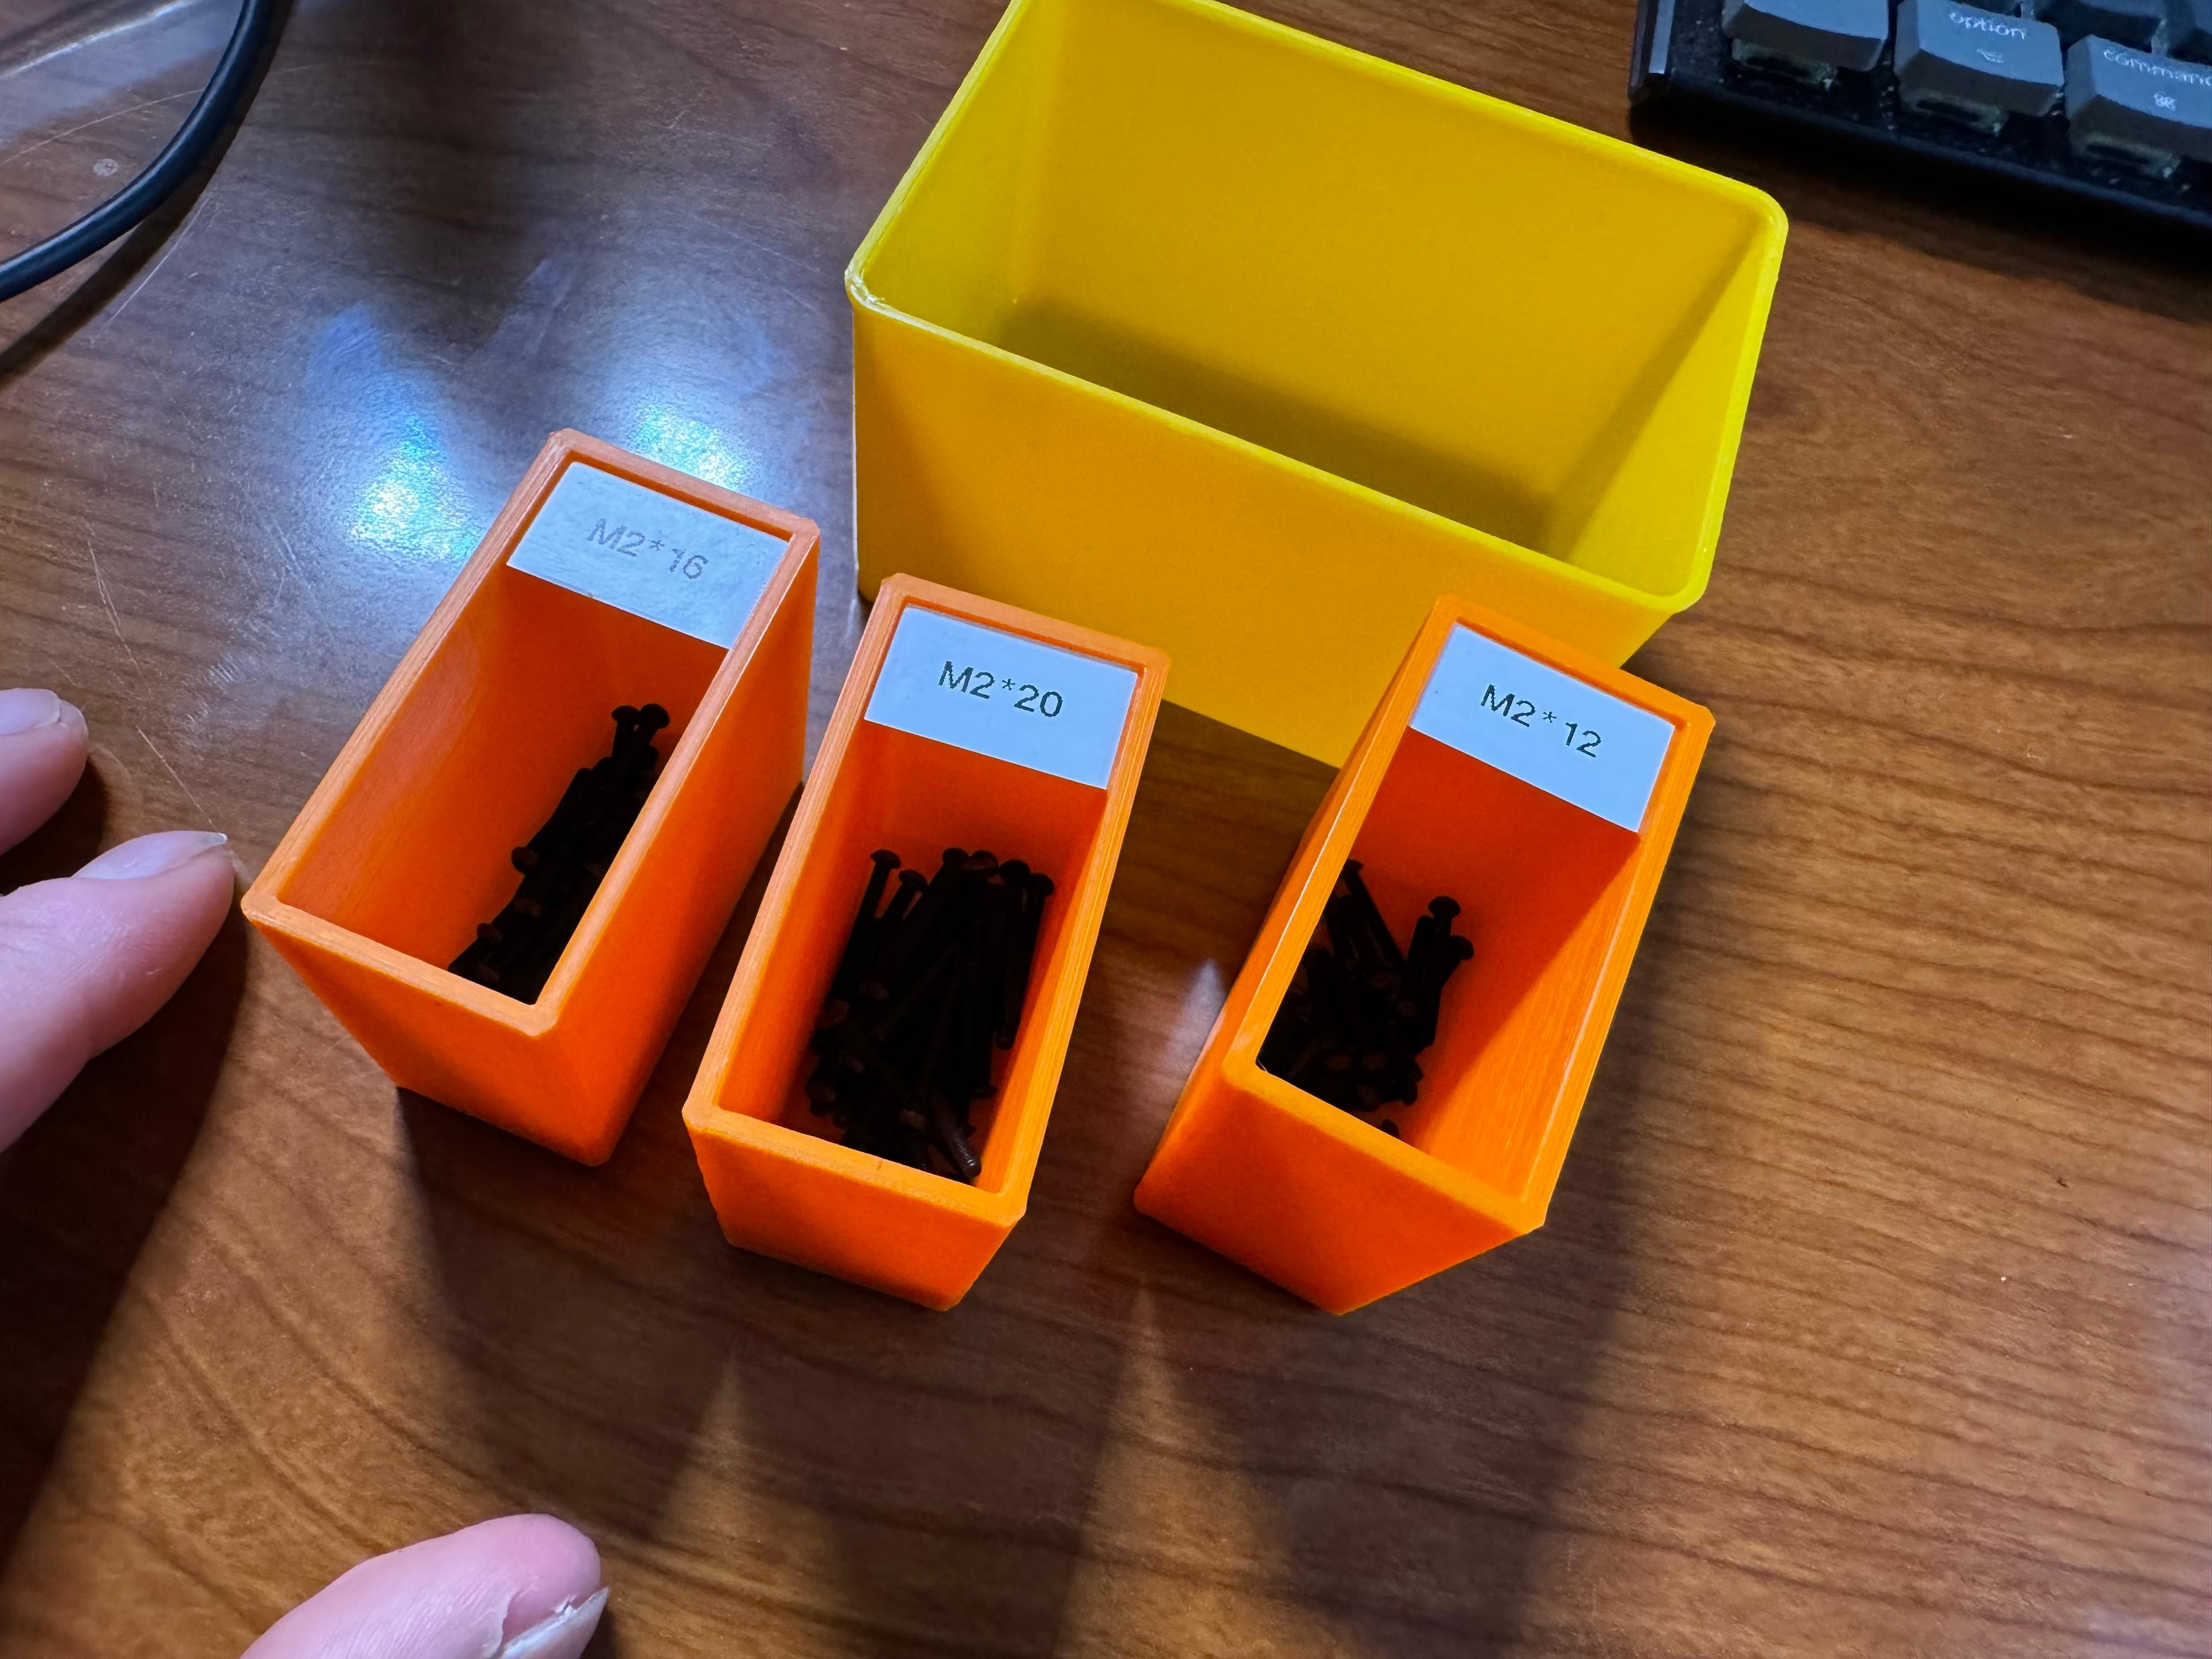 Harbor Freight Removable Bin Storage Sub-Bins (No Supports Needed!) 3d model